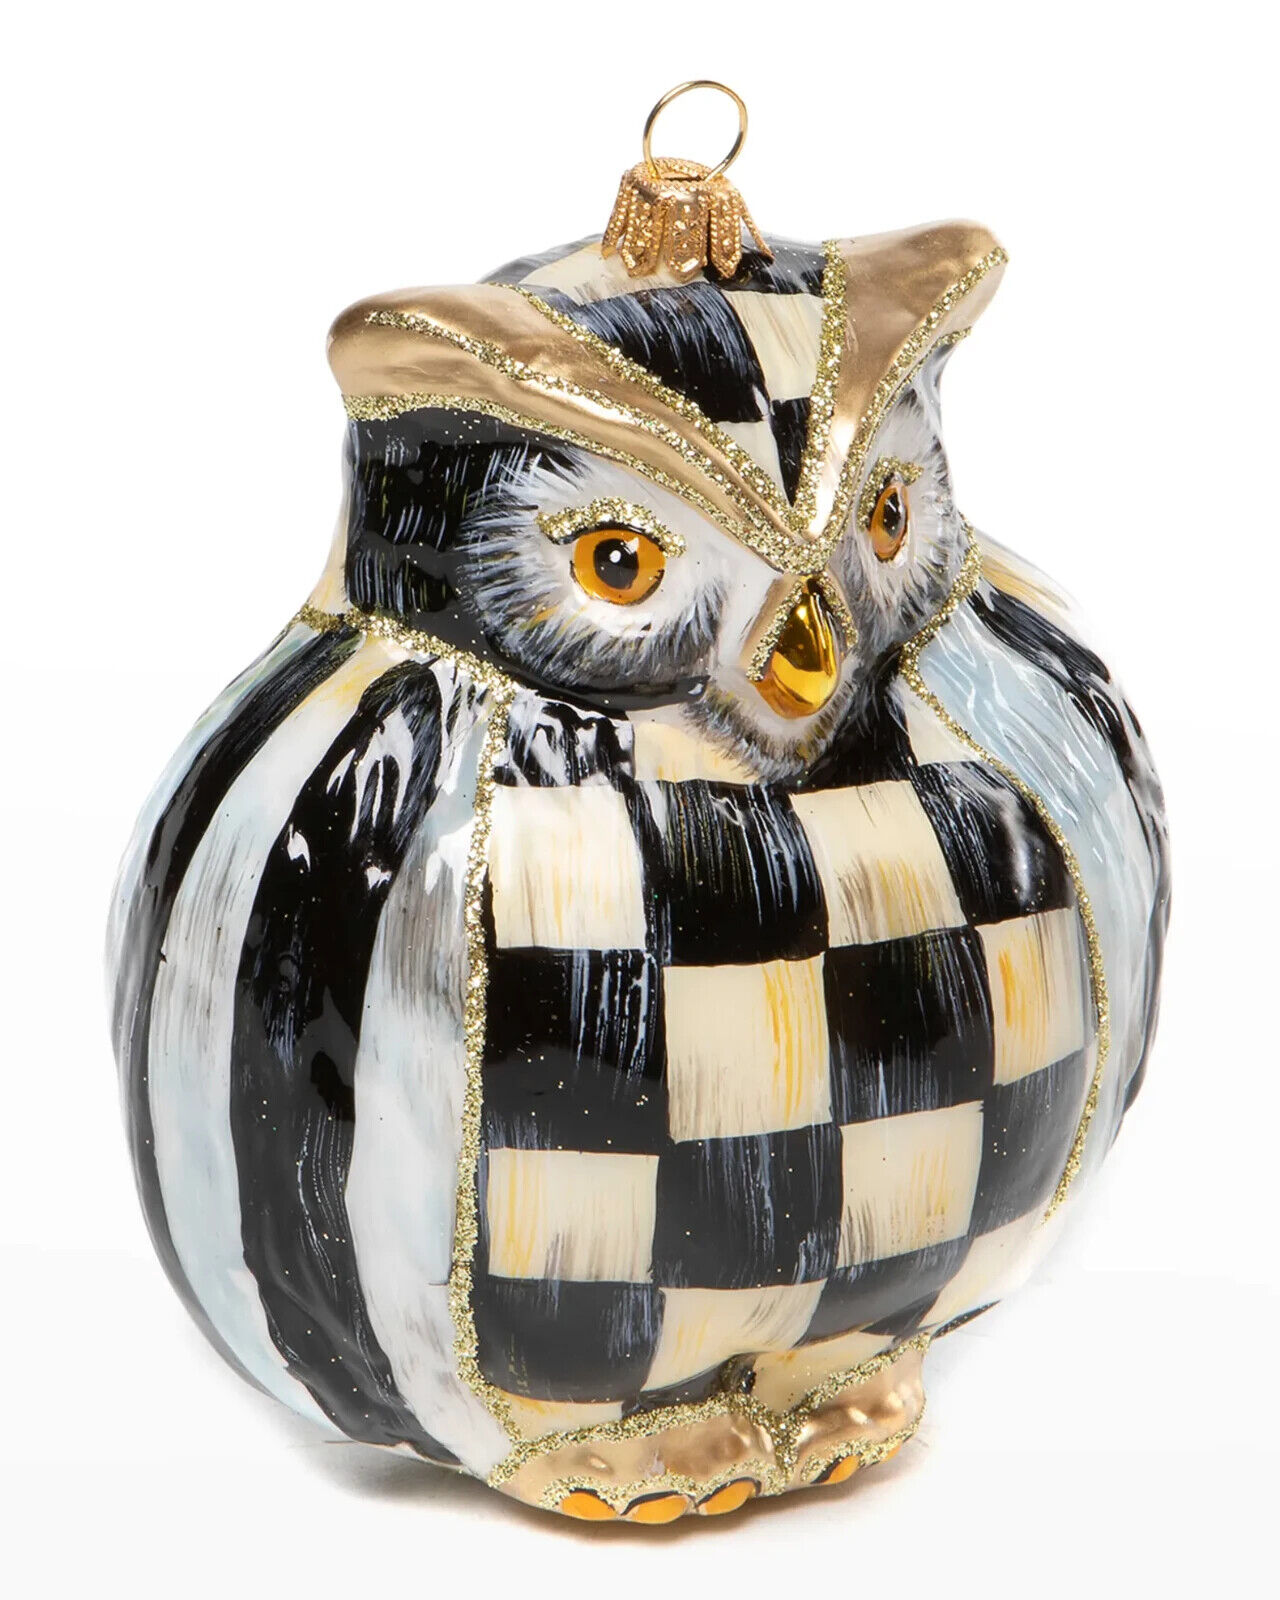 Brand New Mackenzie Childs Holiday Courtly Owl Glass Ornament